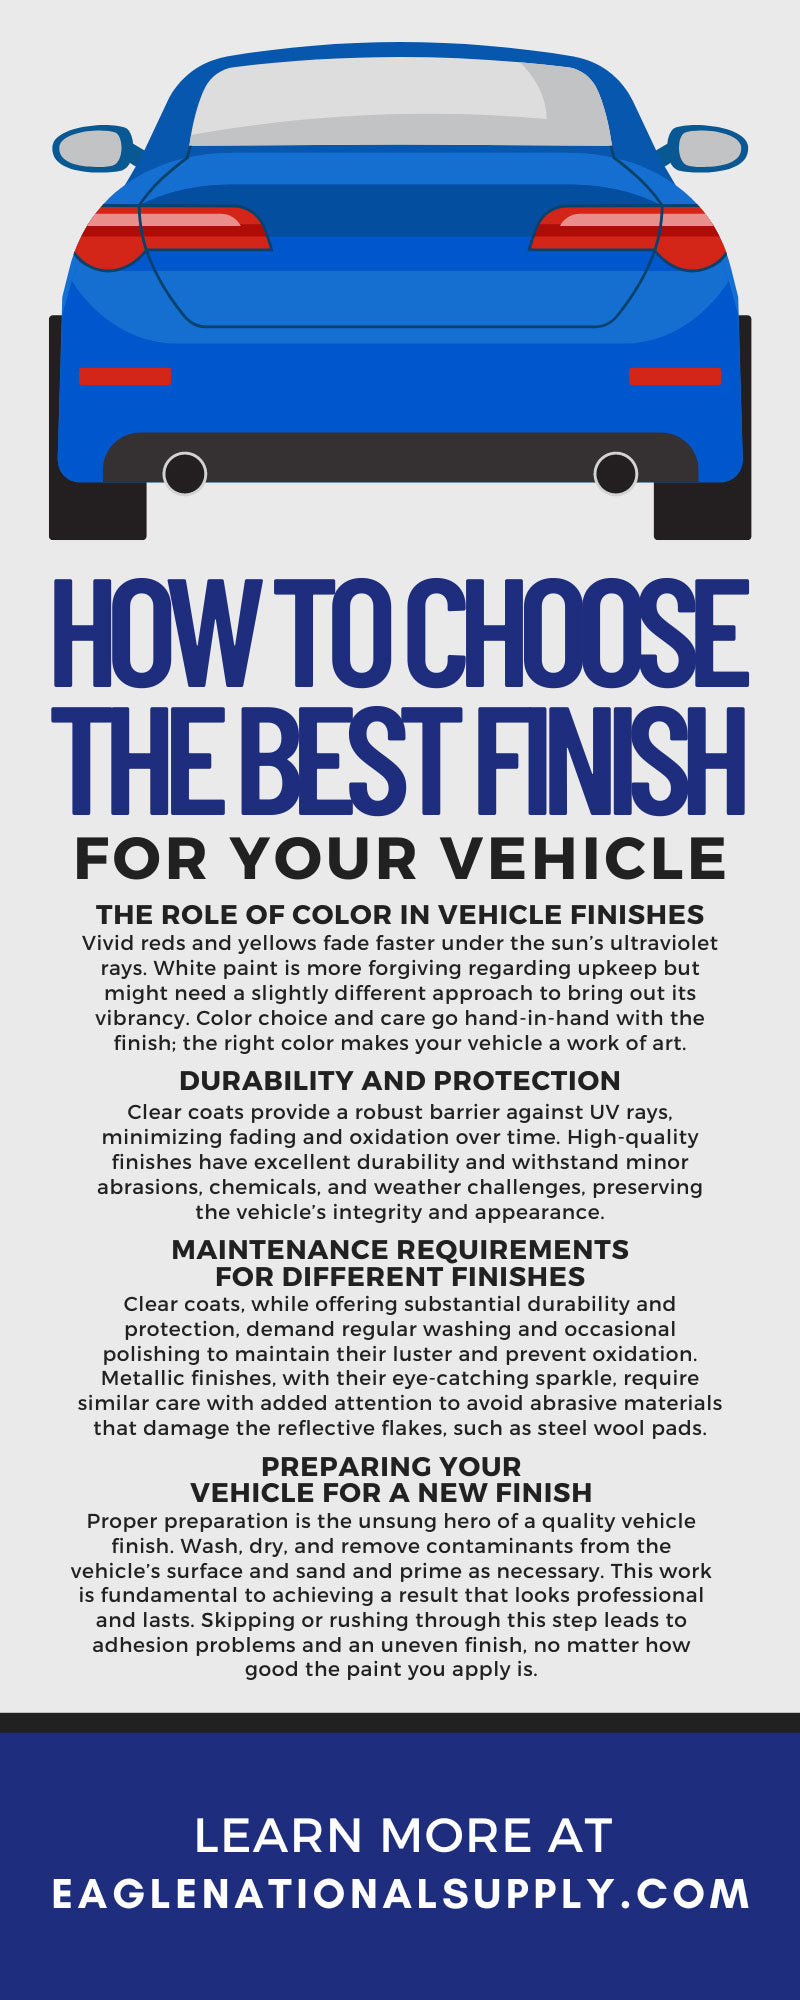 How To Choose the Best Finish for Your Vehicle